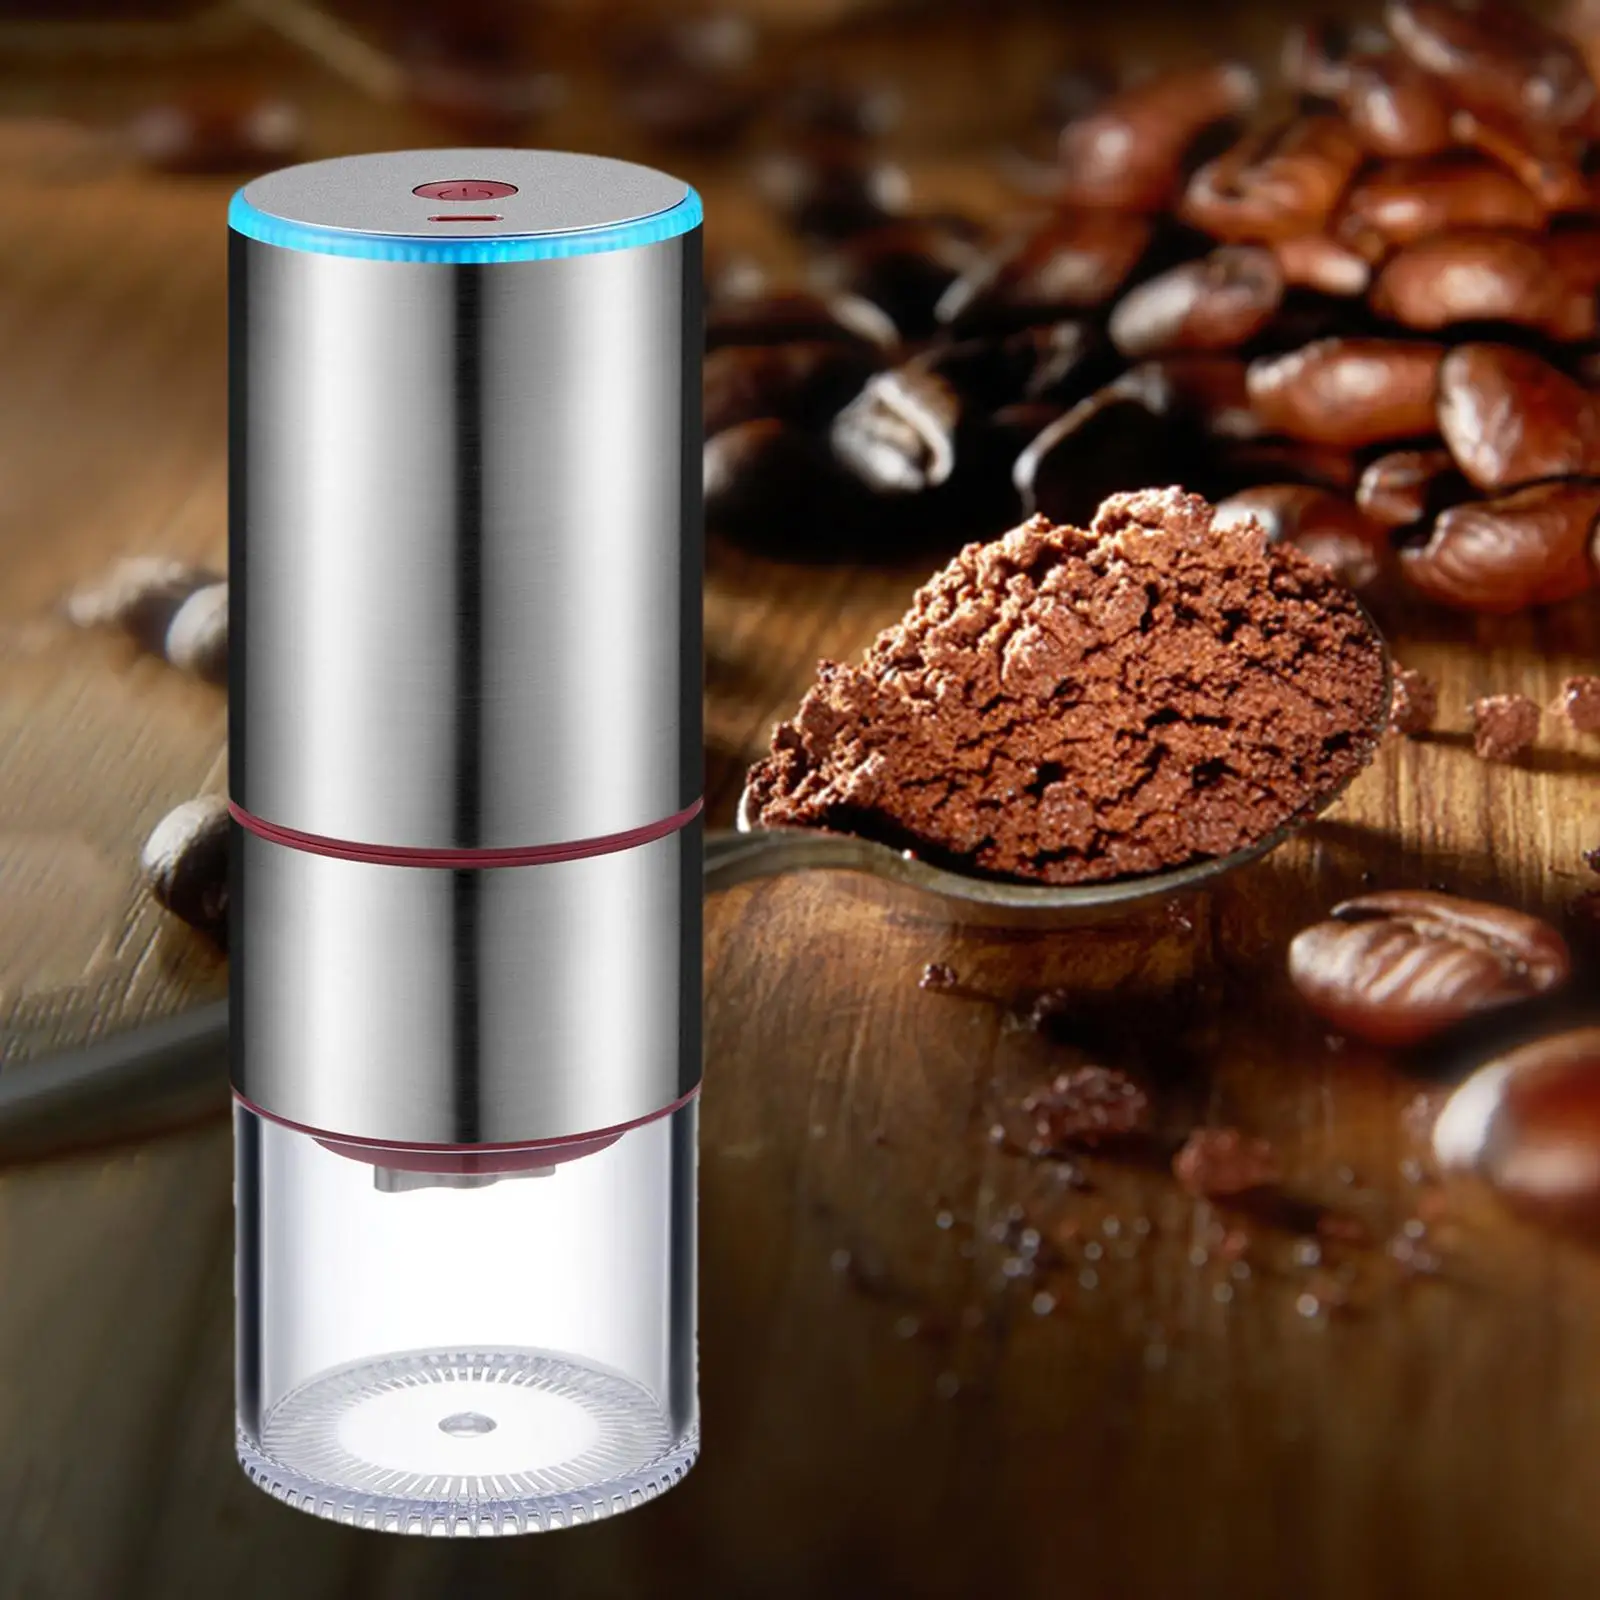 Portable Electric Coffee Grinder Bean Grinding Burr Mill Stainless Steel Whole Bean Burr Coffee Grinding for Espresso Macchiato